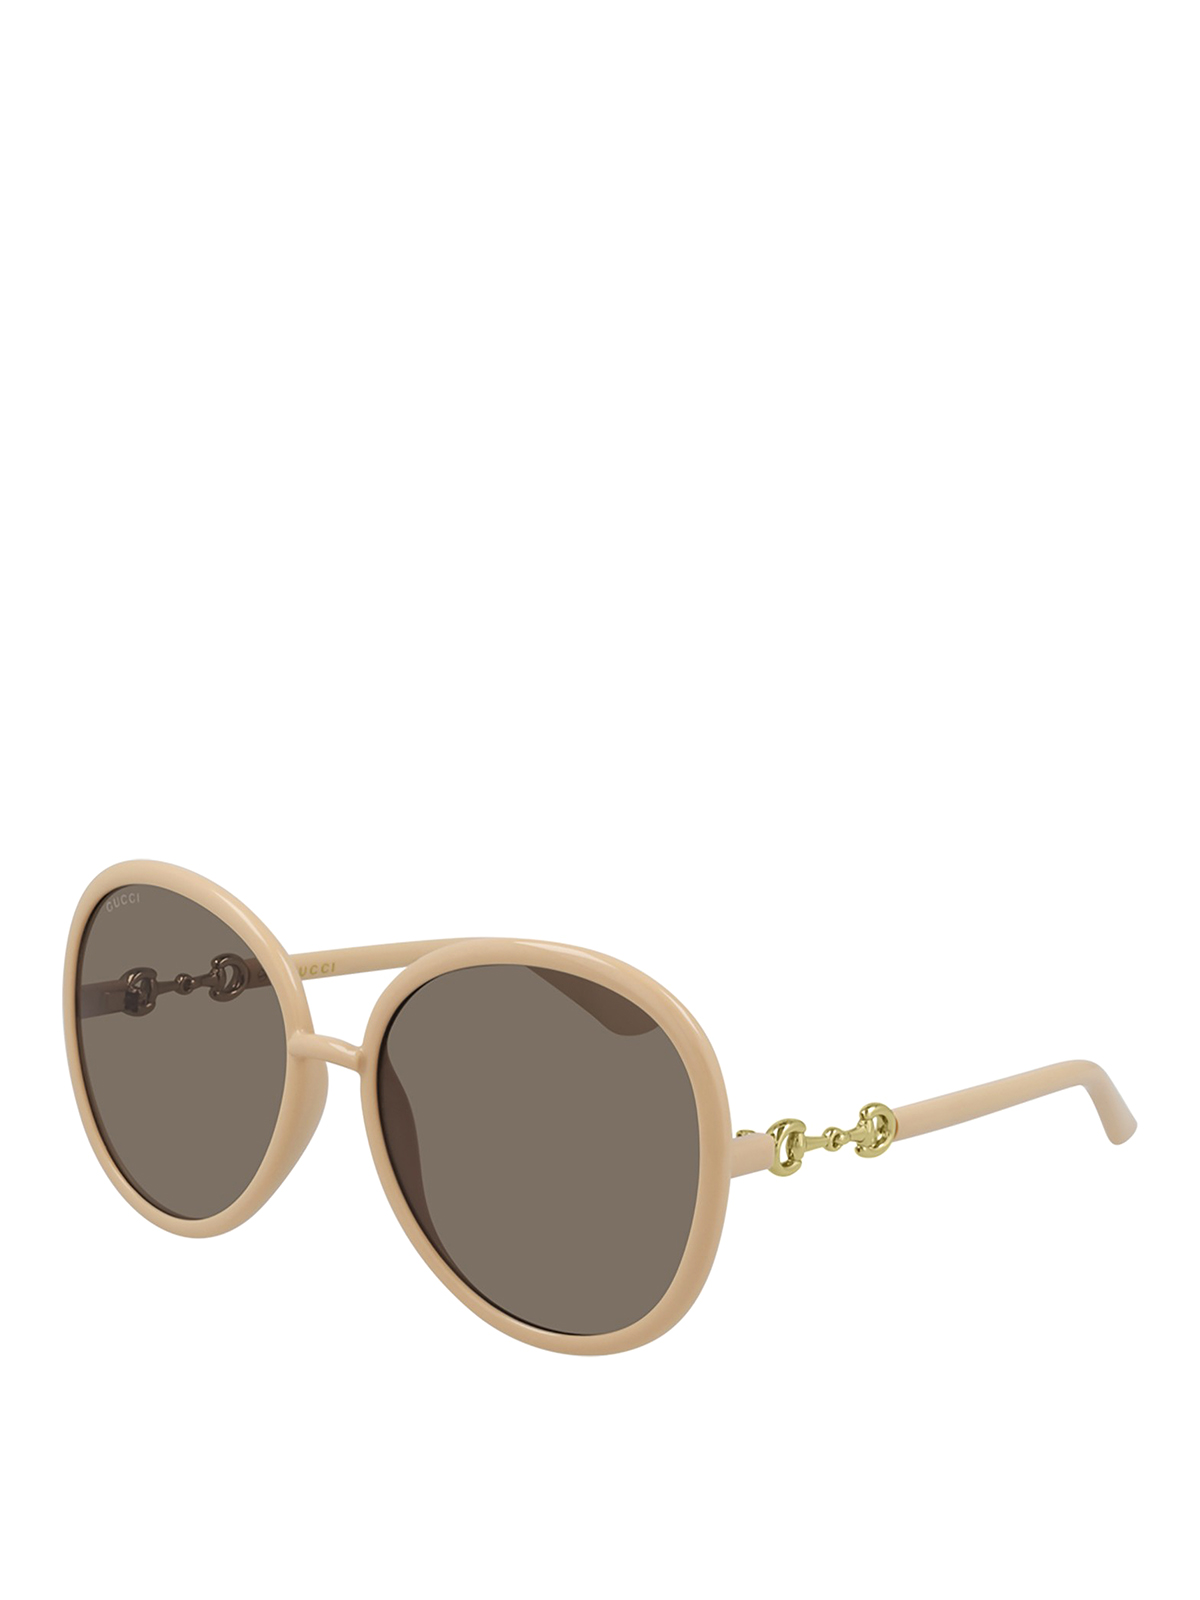 Gucci Jackie-o Sunglasses In Nude And Neutrals